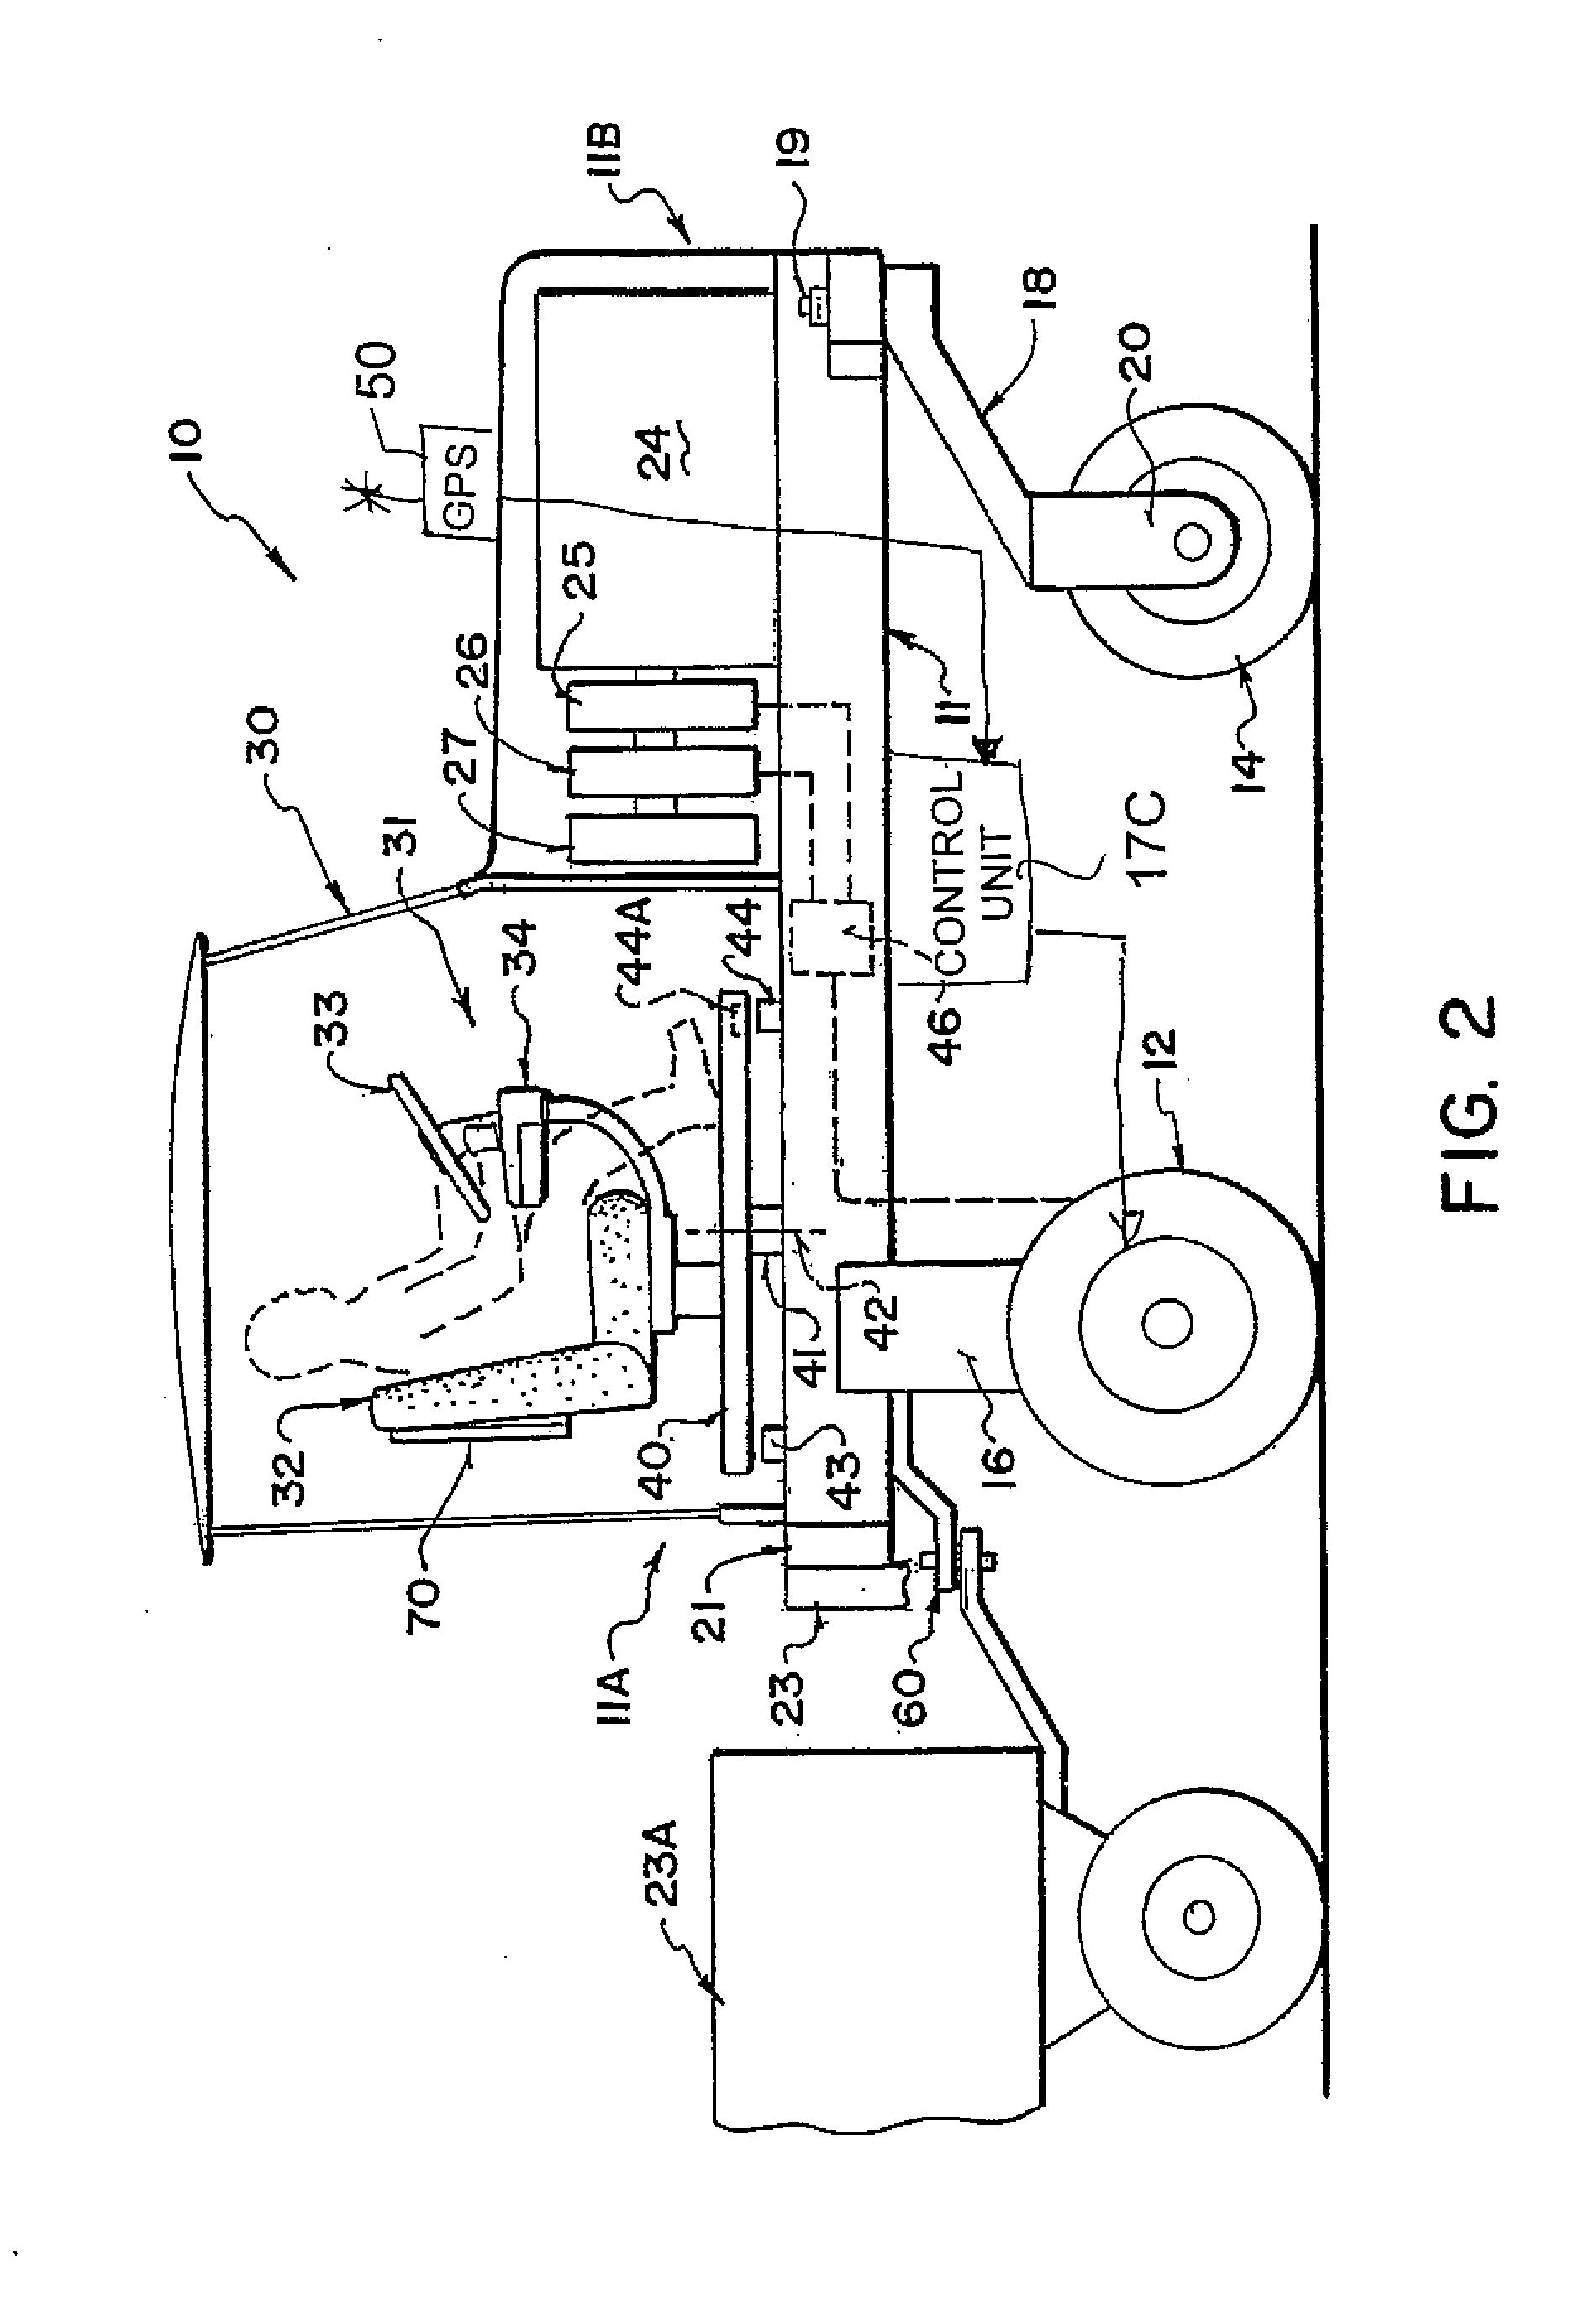 Speed and Steering Control of a Hydraulically Driven Tractor